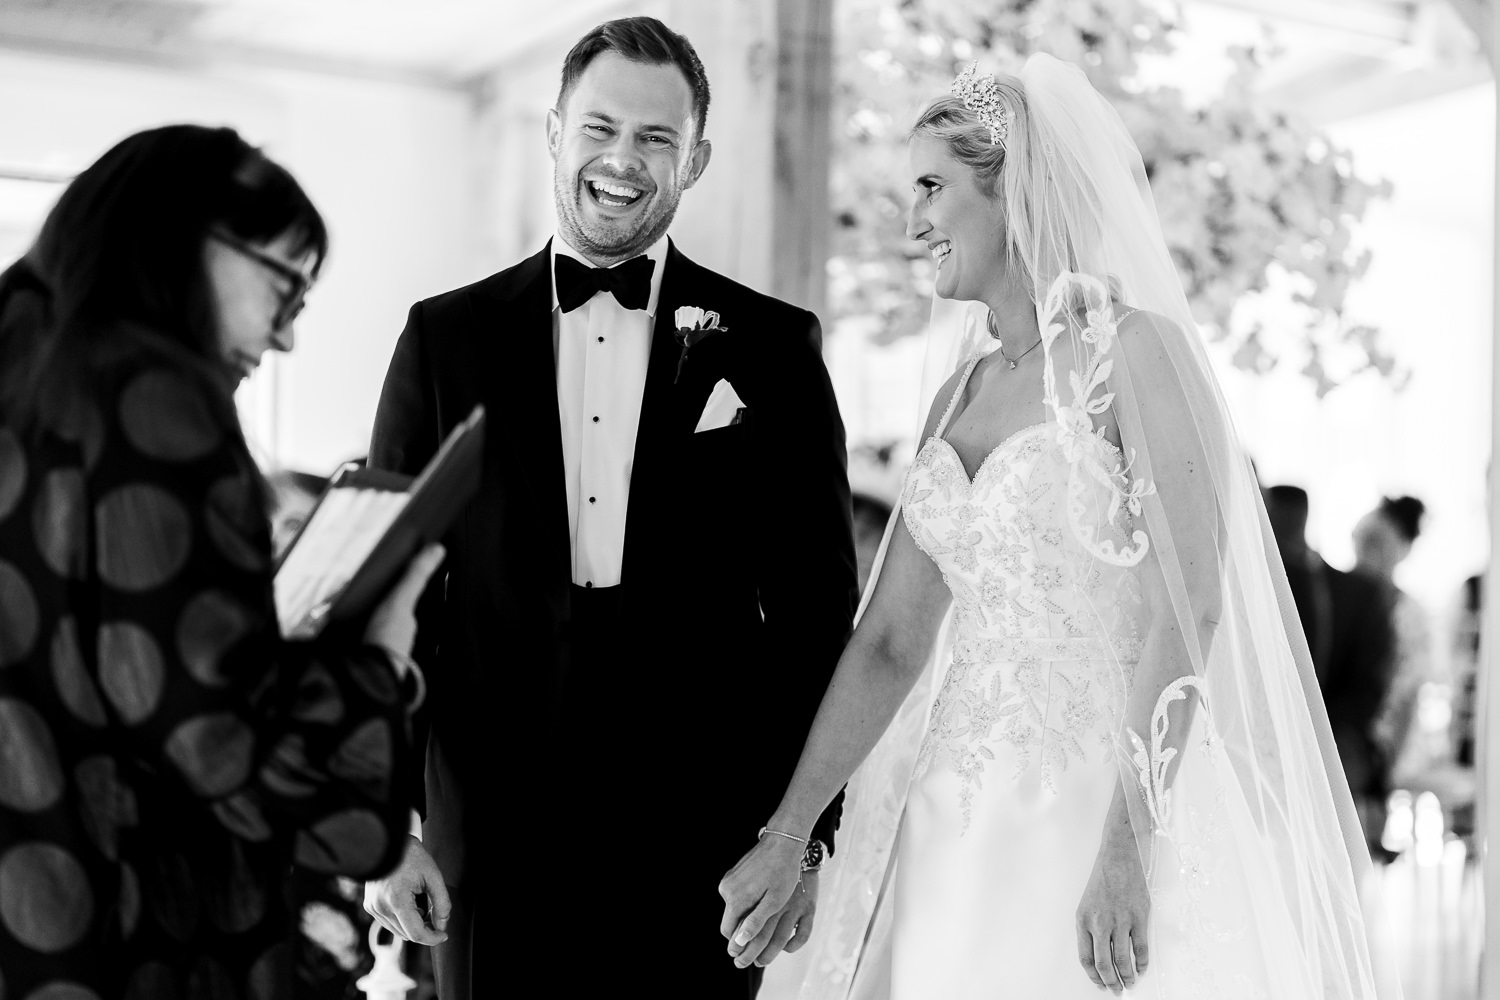 Bride and groom laughing during ceremony